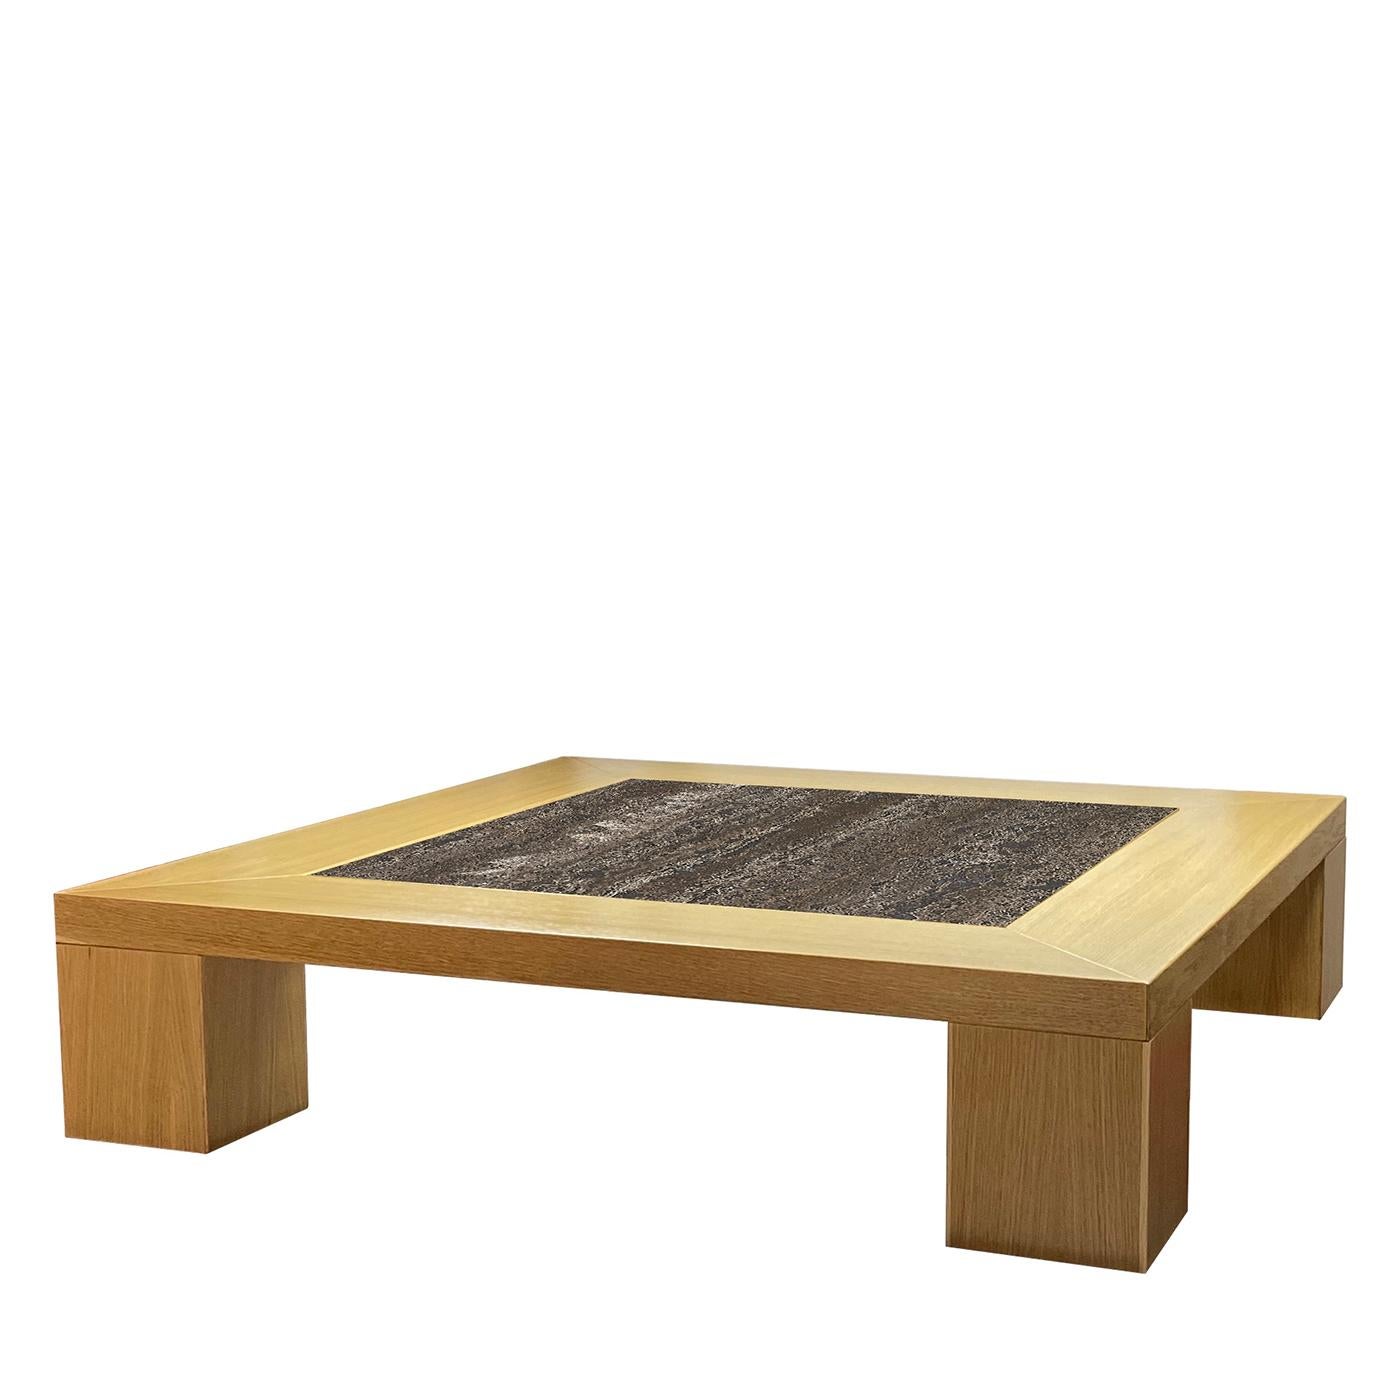 A restrained, clean-cut durmast frame traces the silhouette of this coffee table, an exquisite piece for complementing refined modern decors. The characteristic element is the intriguing top inlay in Titanium marble, which strikes with its deep